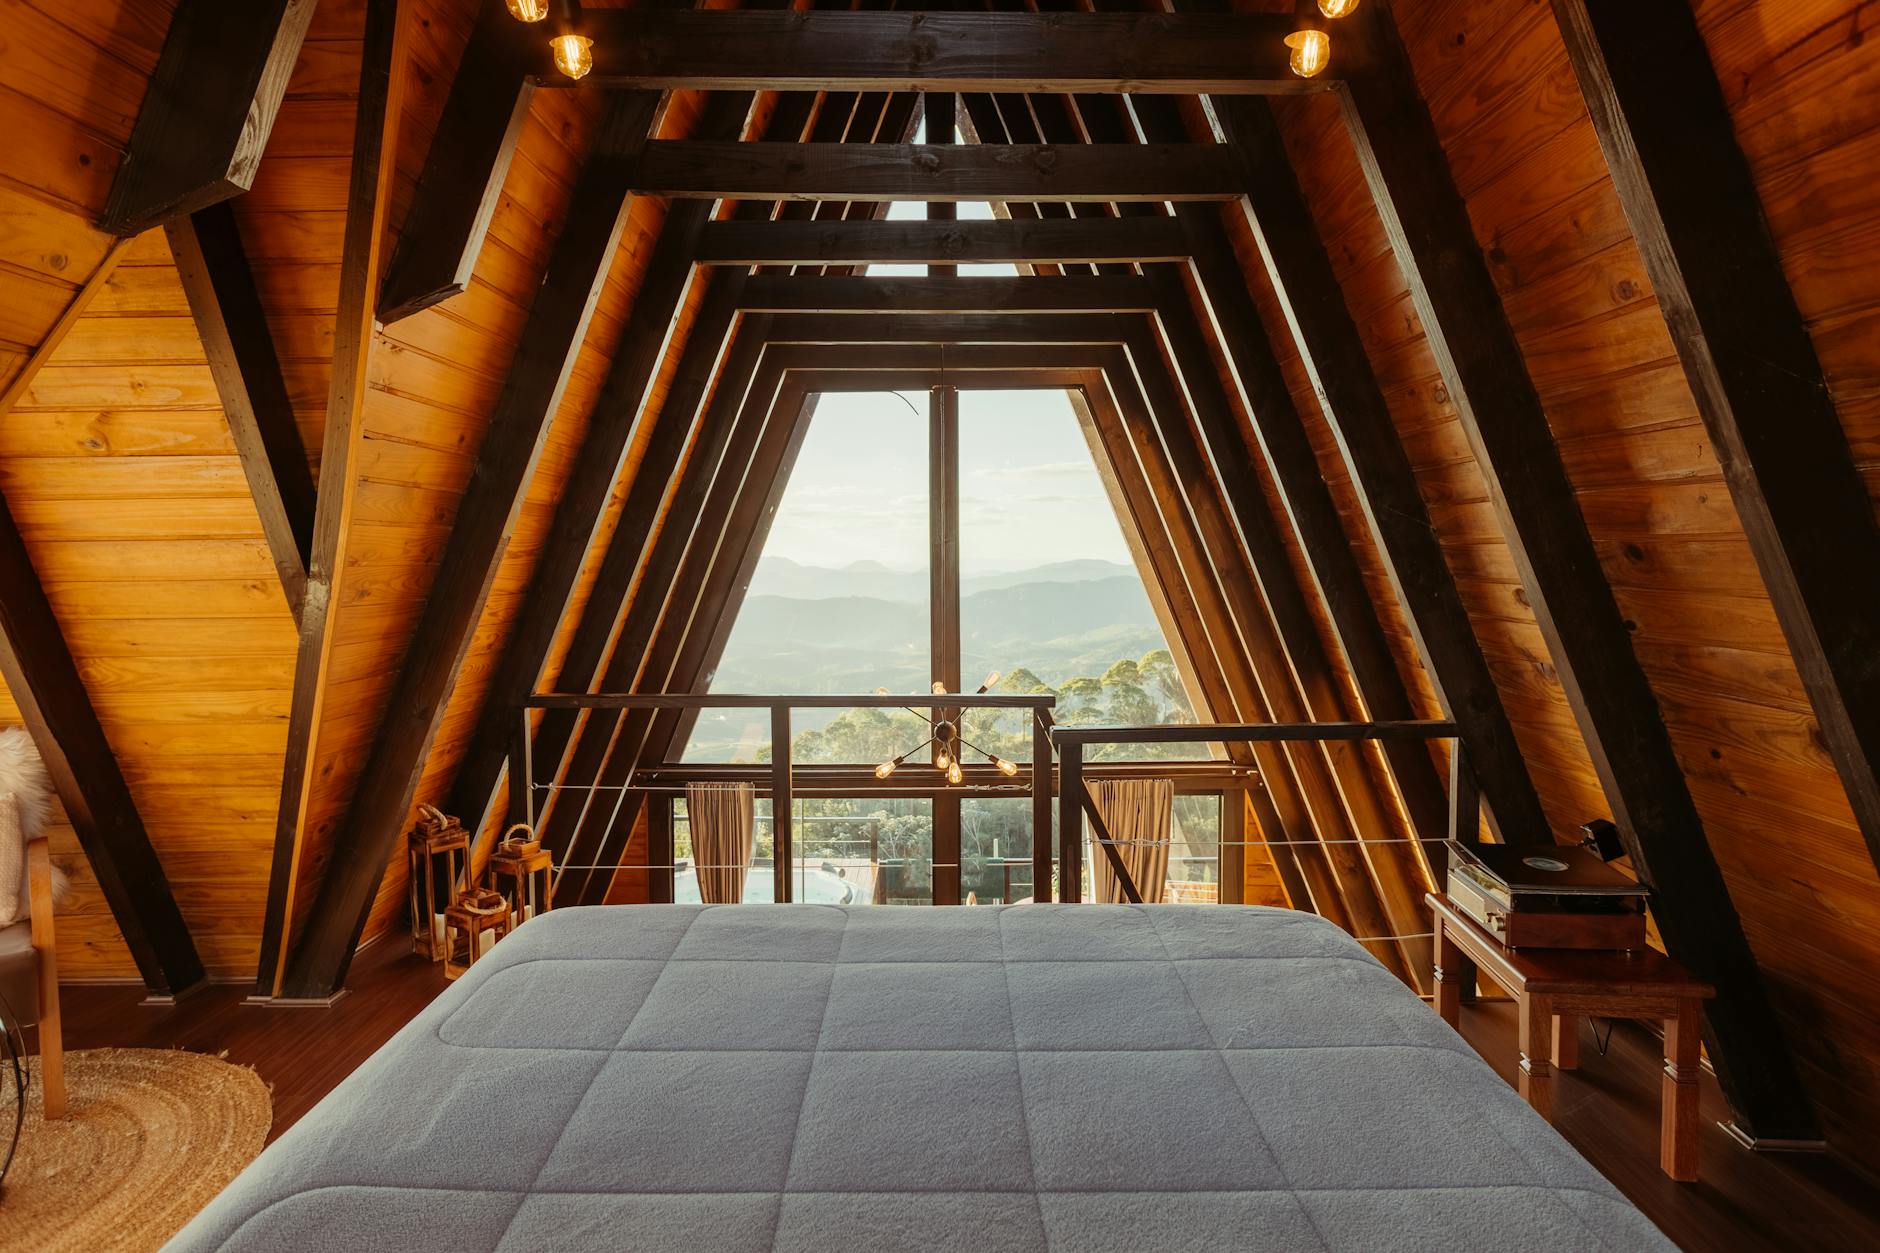 Wide bed in a luxury wooden cabin with a scenic mountain view